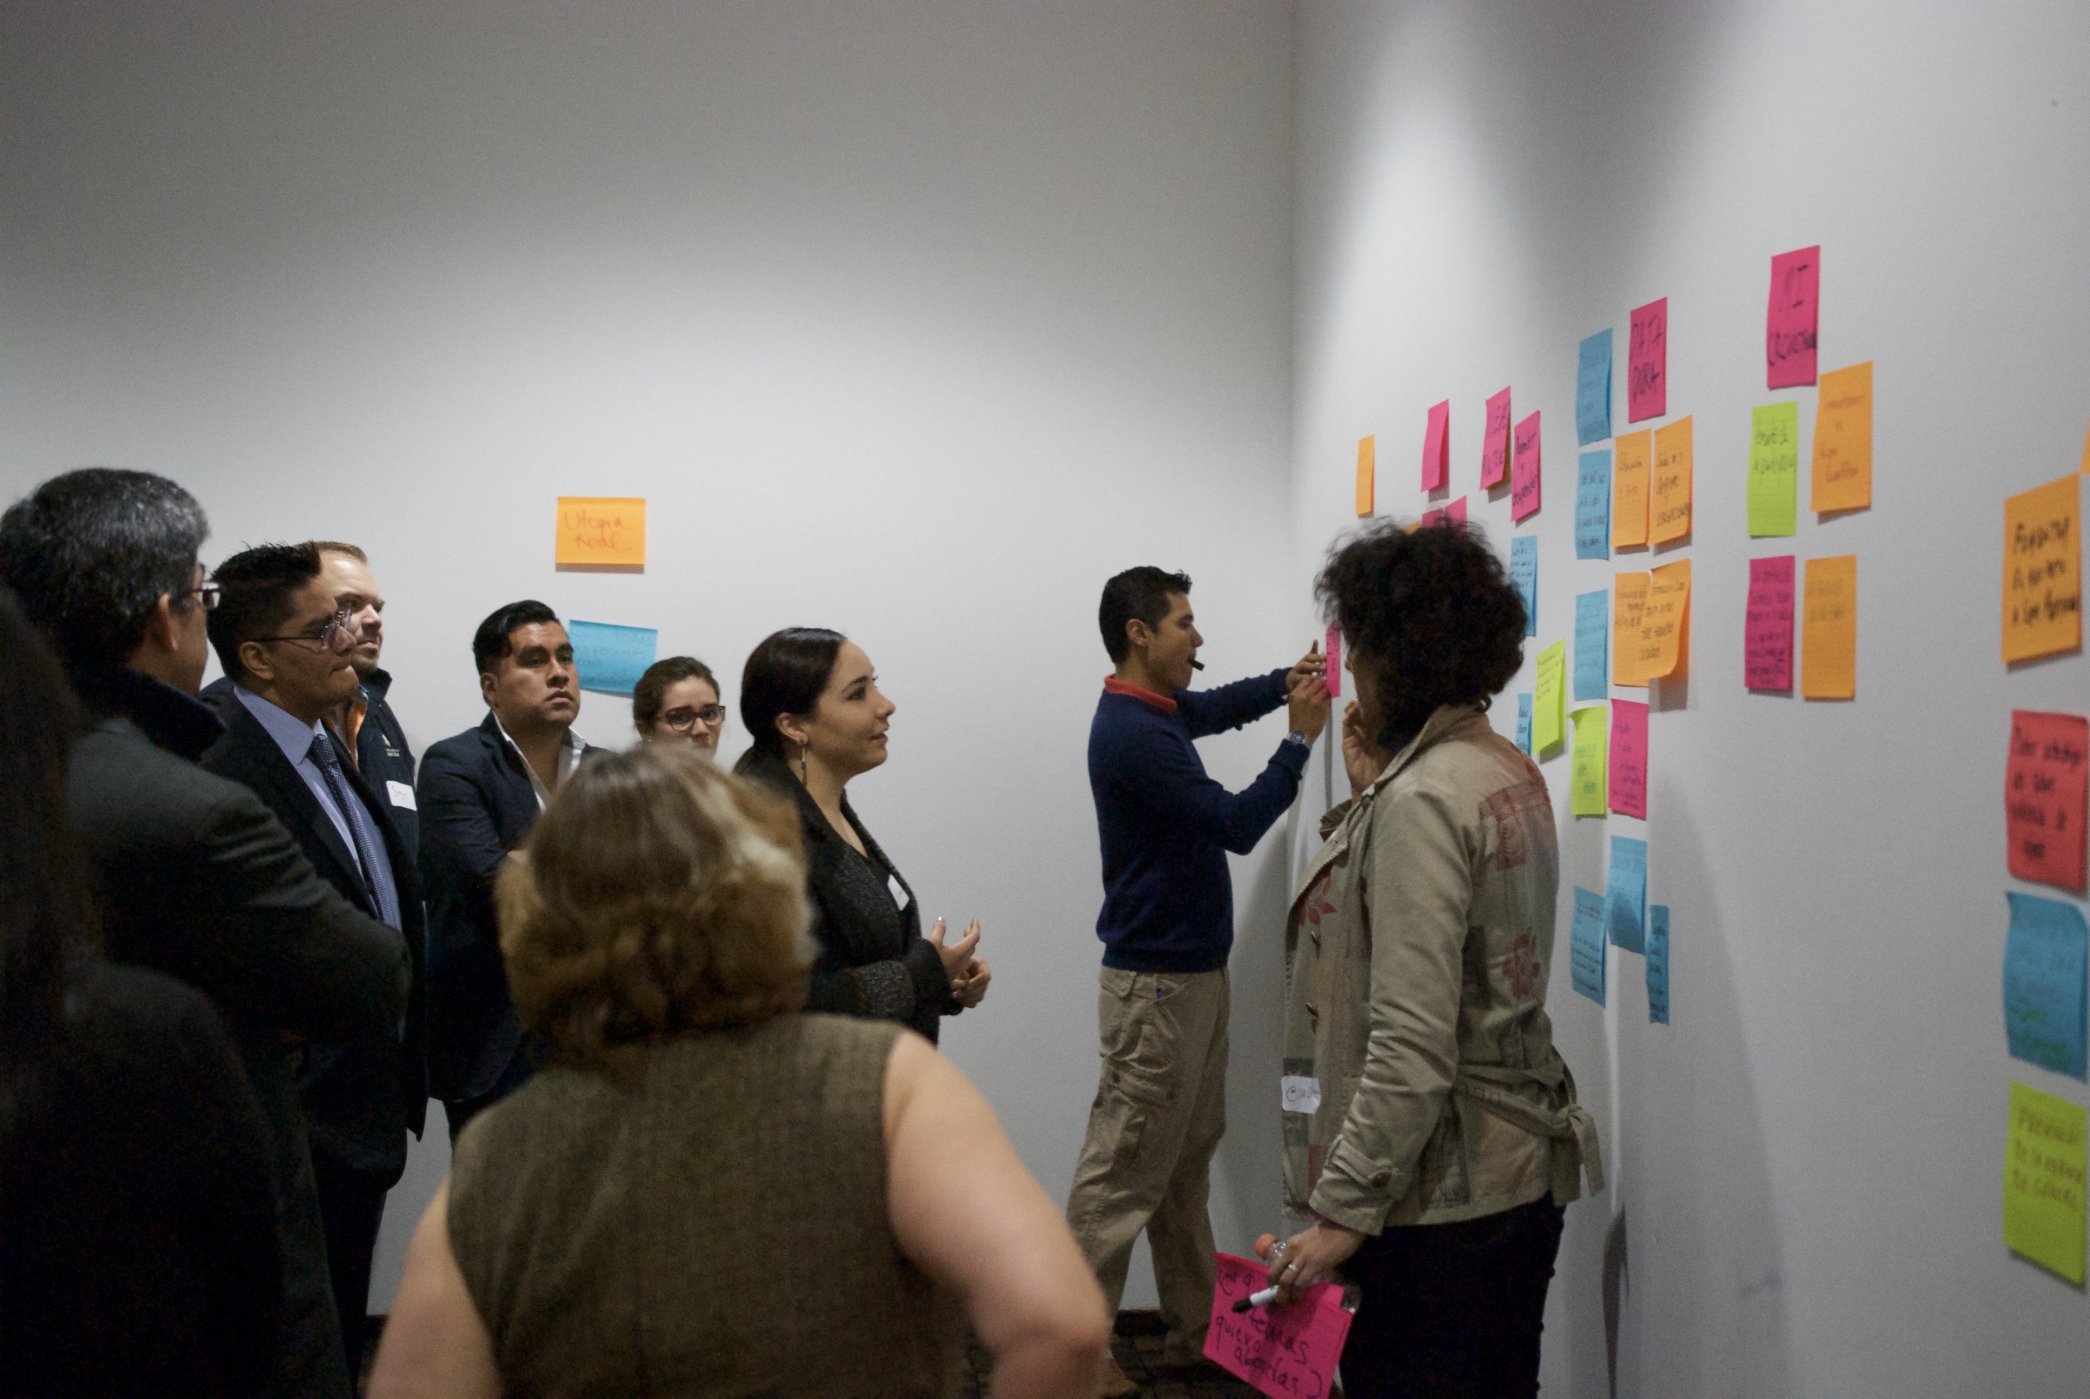 TechCivica participants highlighted common citizen security problems in Mexico